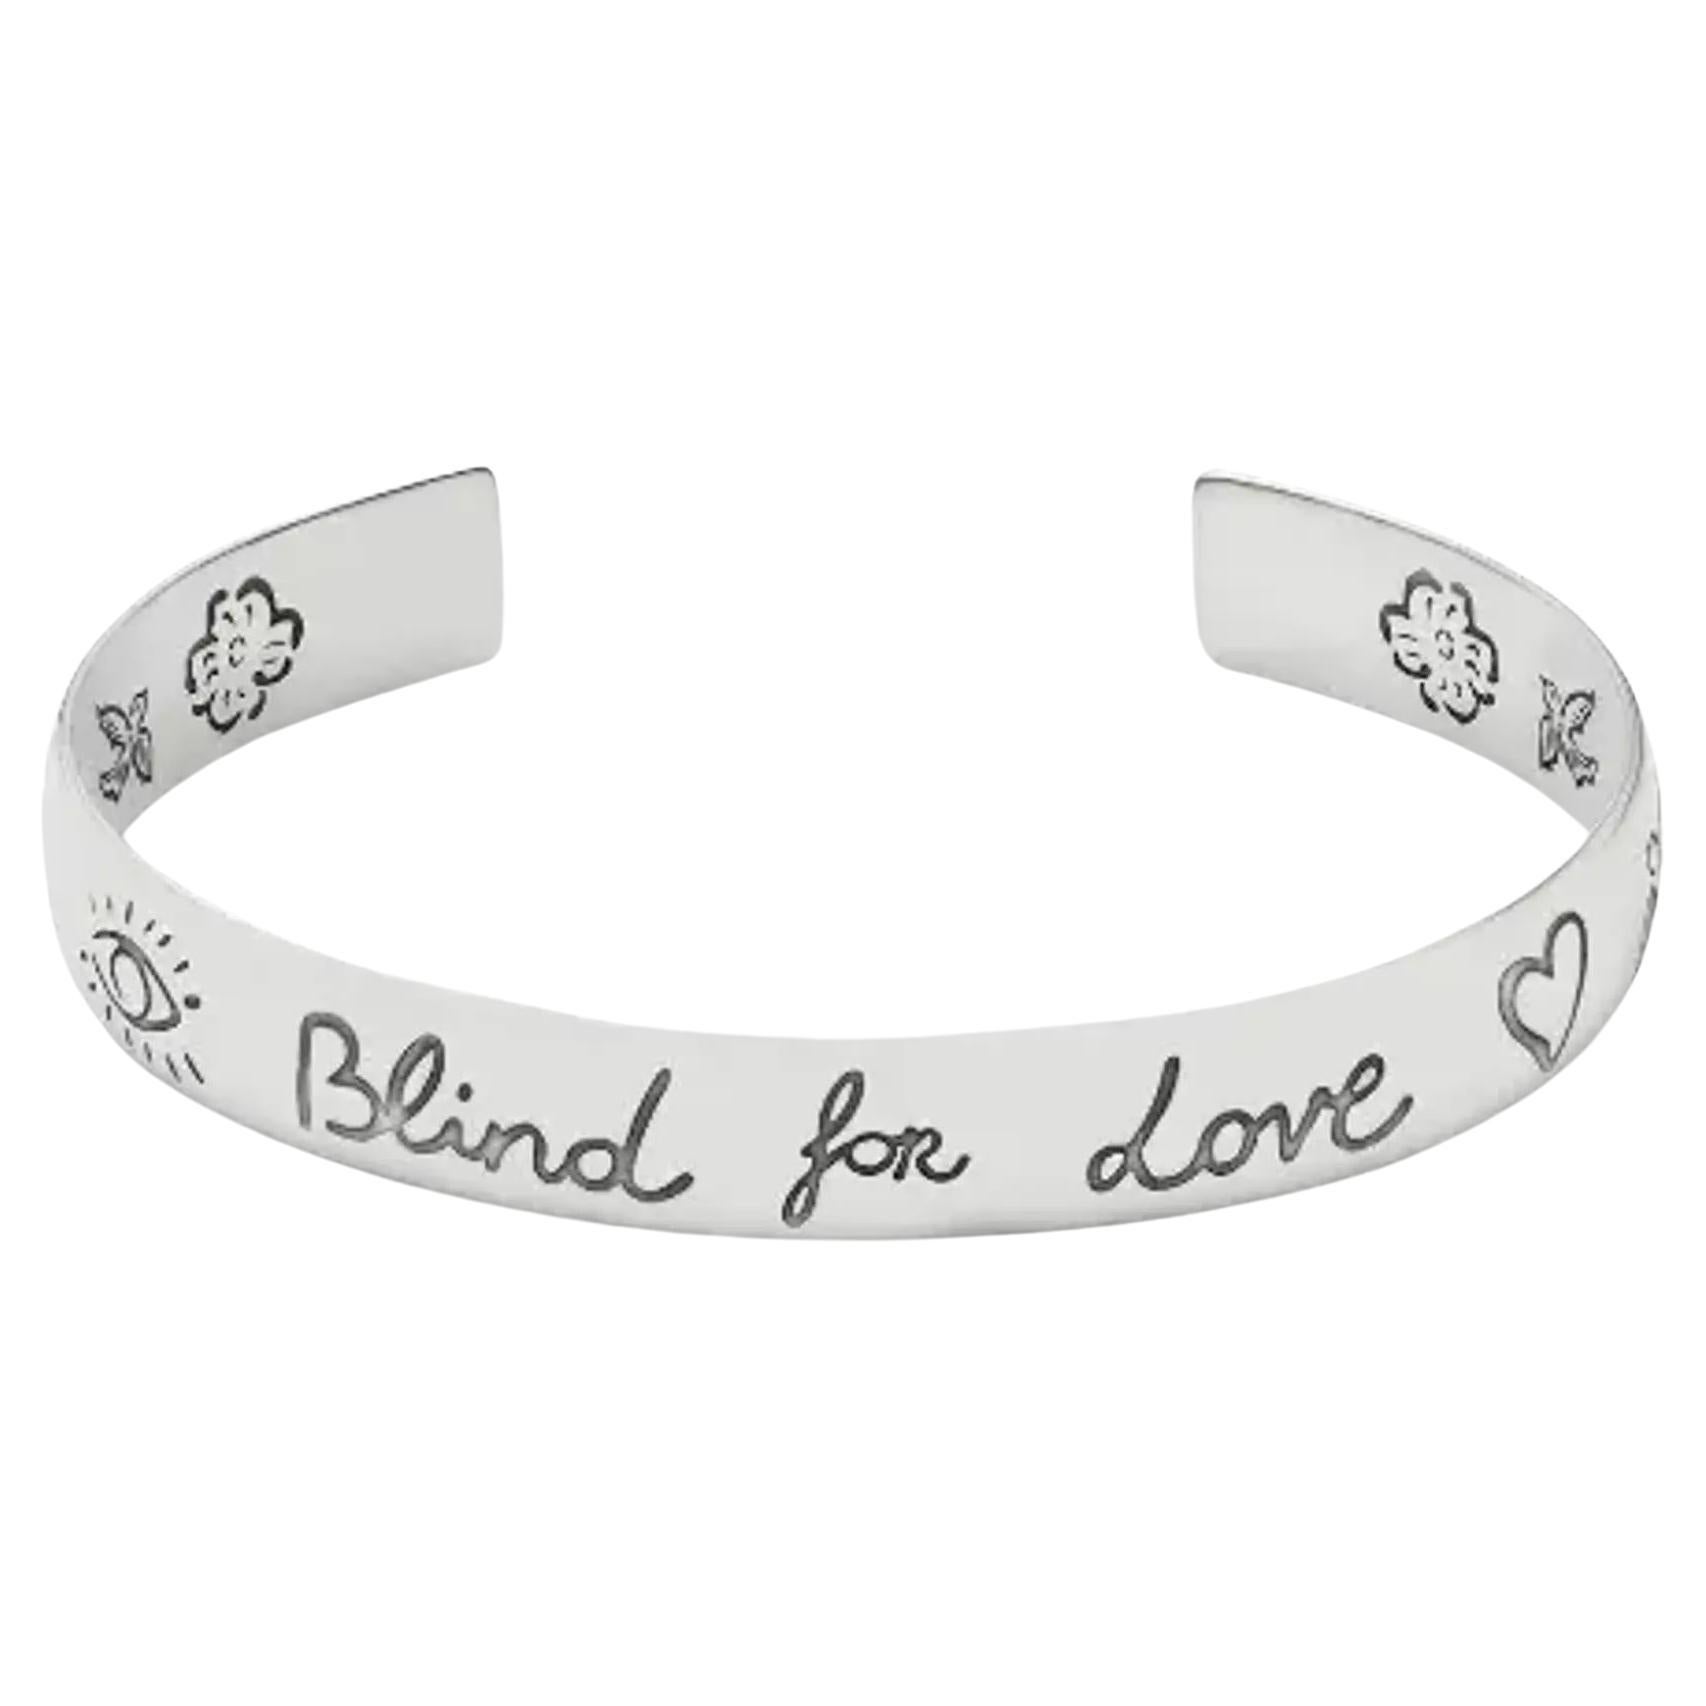 Gucci Blind For Love Cuff Bracelet 925 Sterling Silver